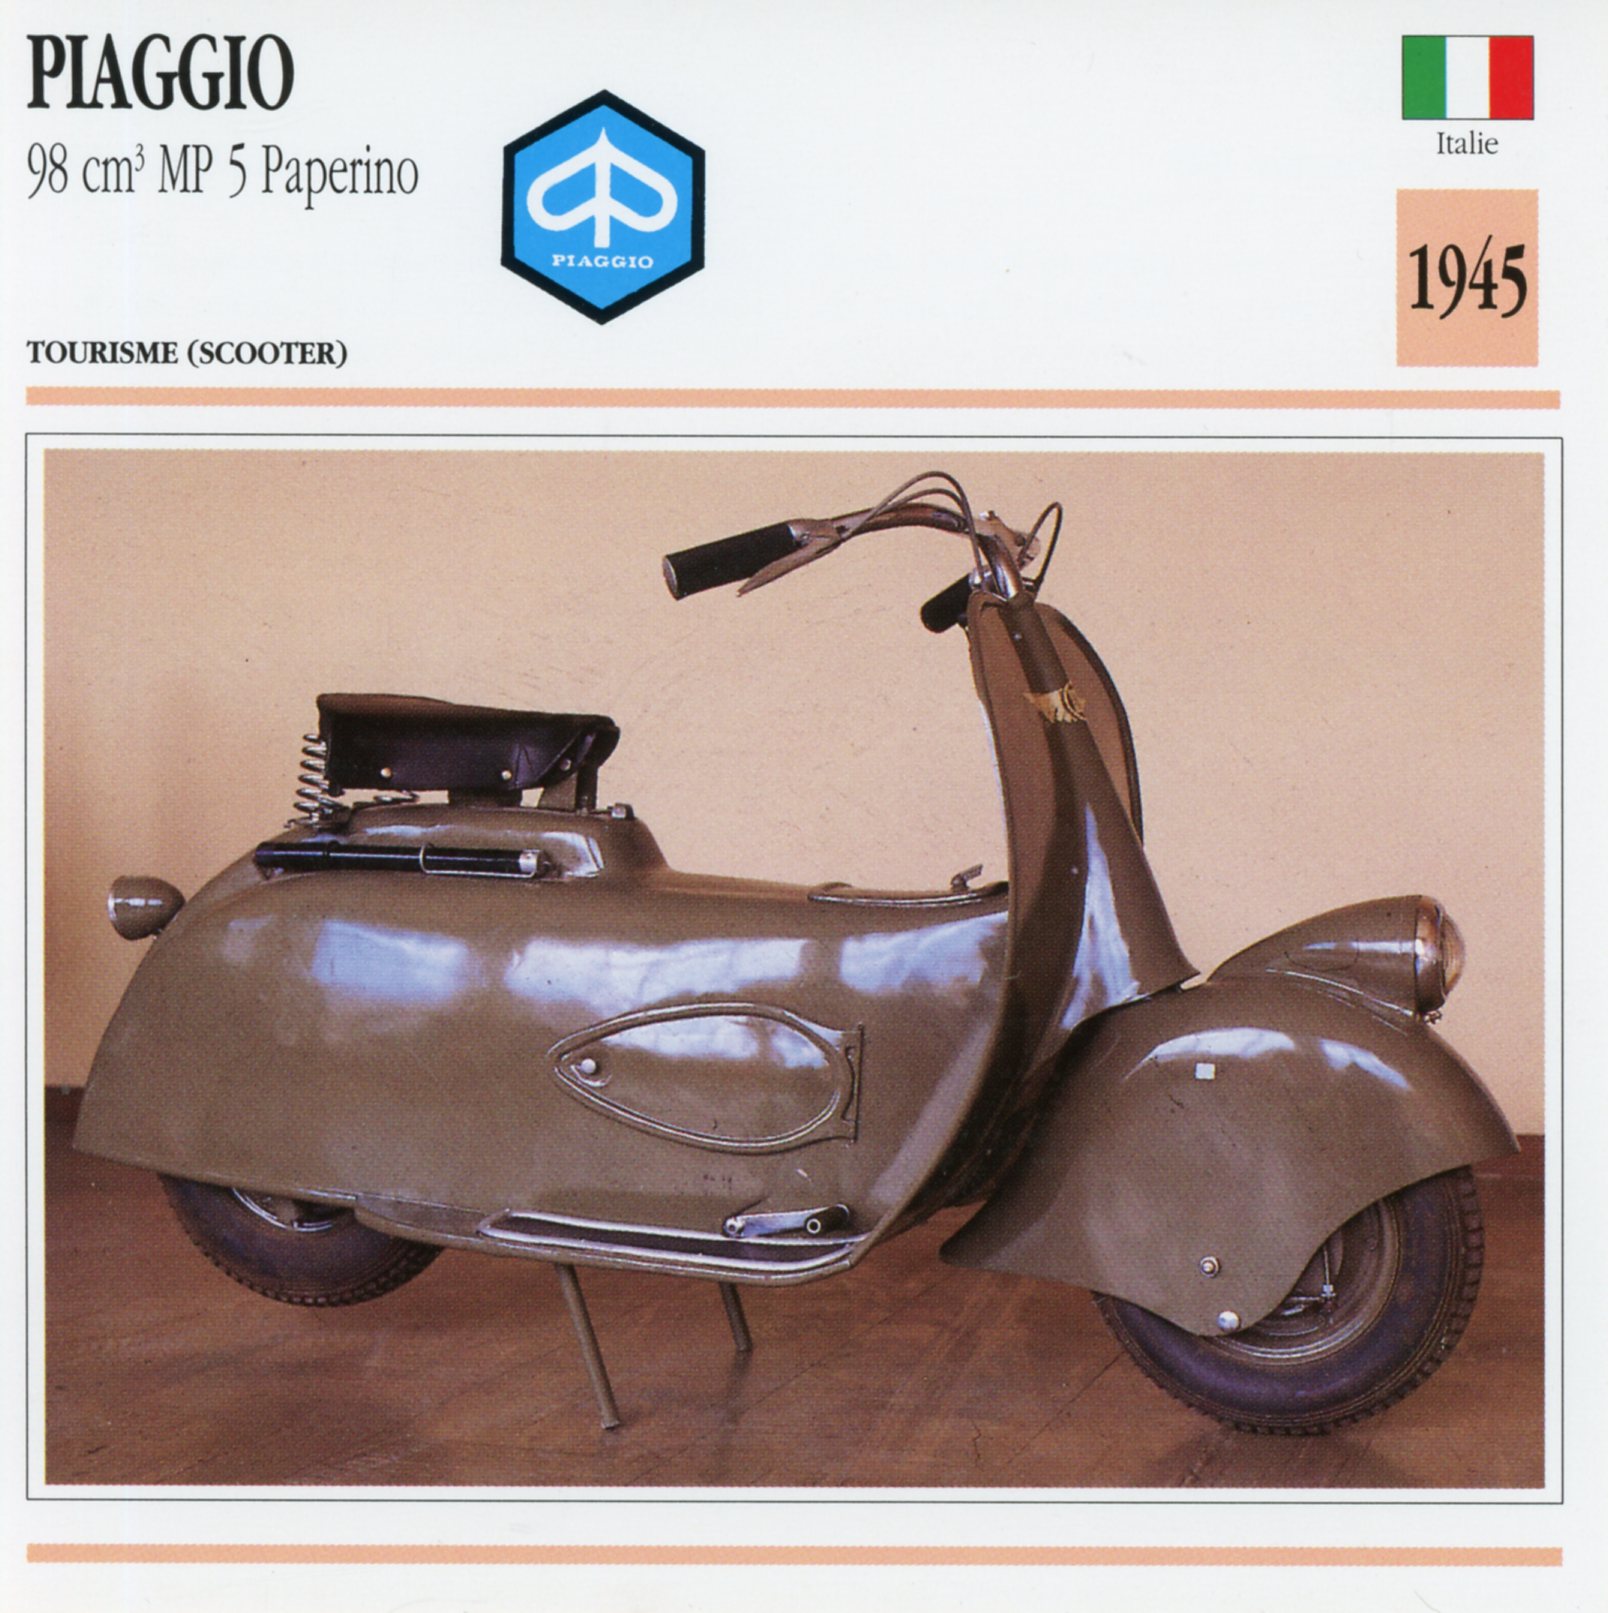 PIAGGIO-MP5-PAPERINO-LEMASTERBROCKERS-FICHE-SCOOTER-CARS-MOTORCYLCES